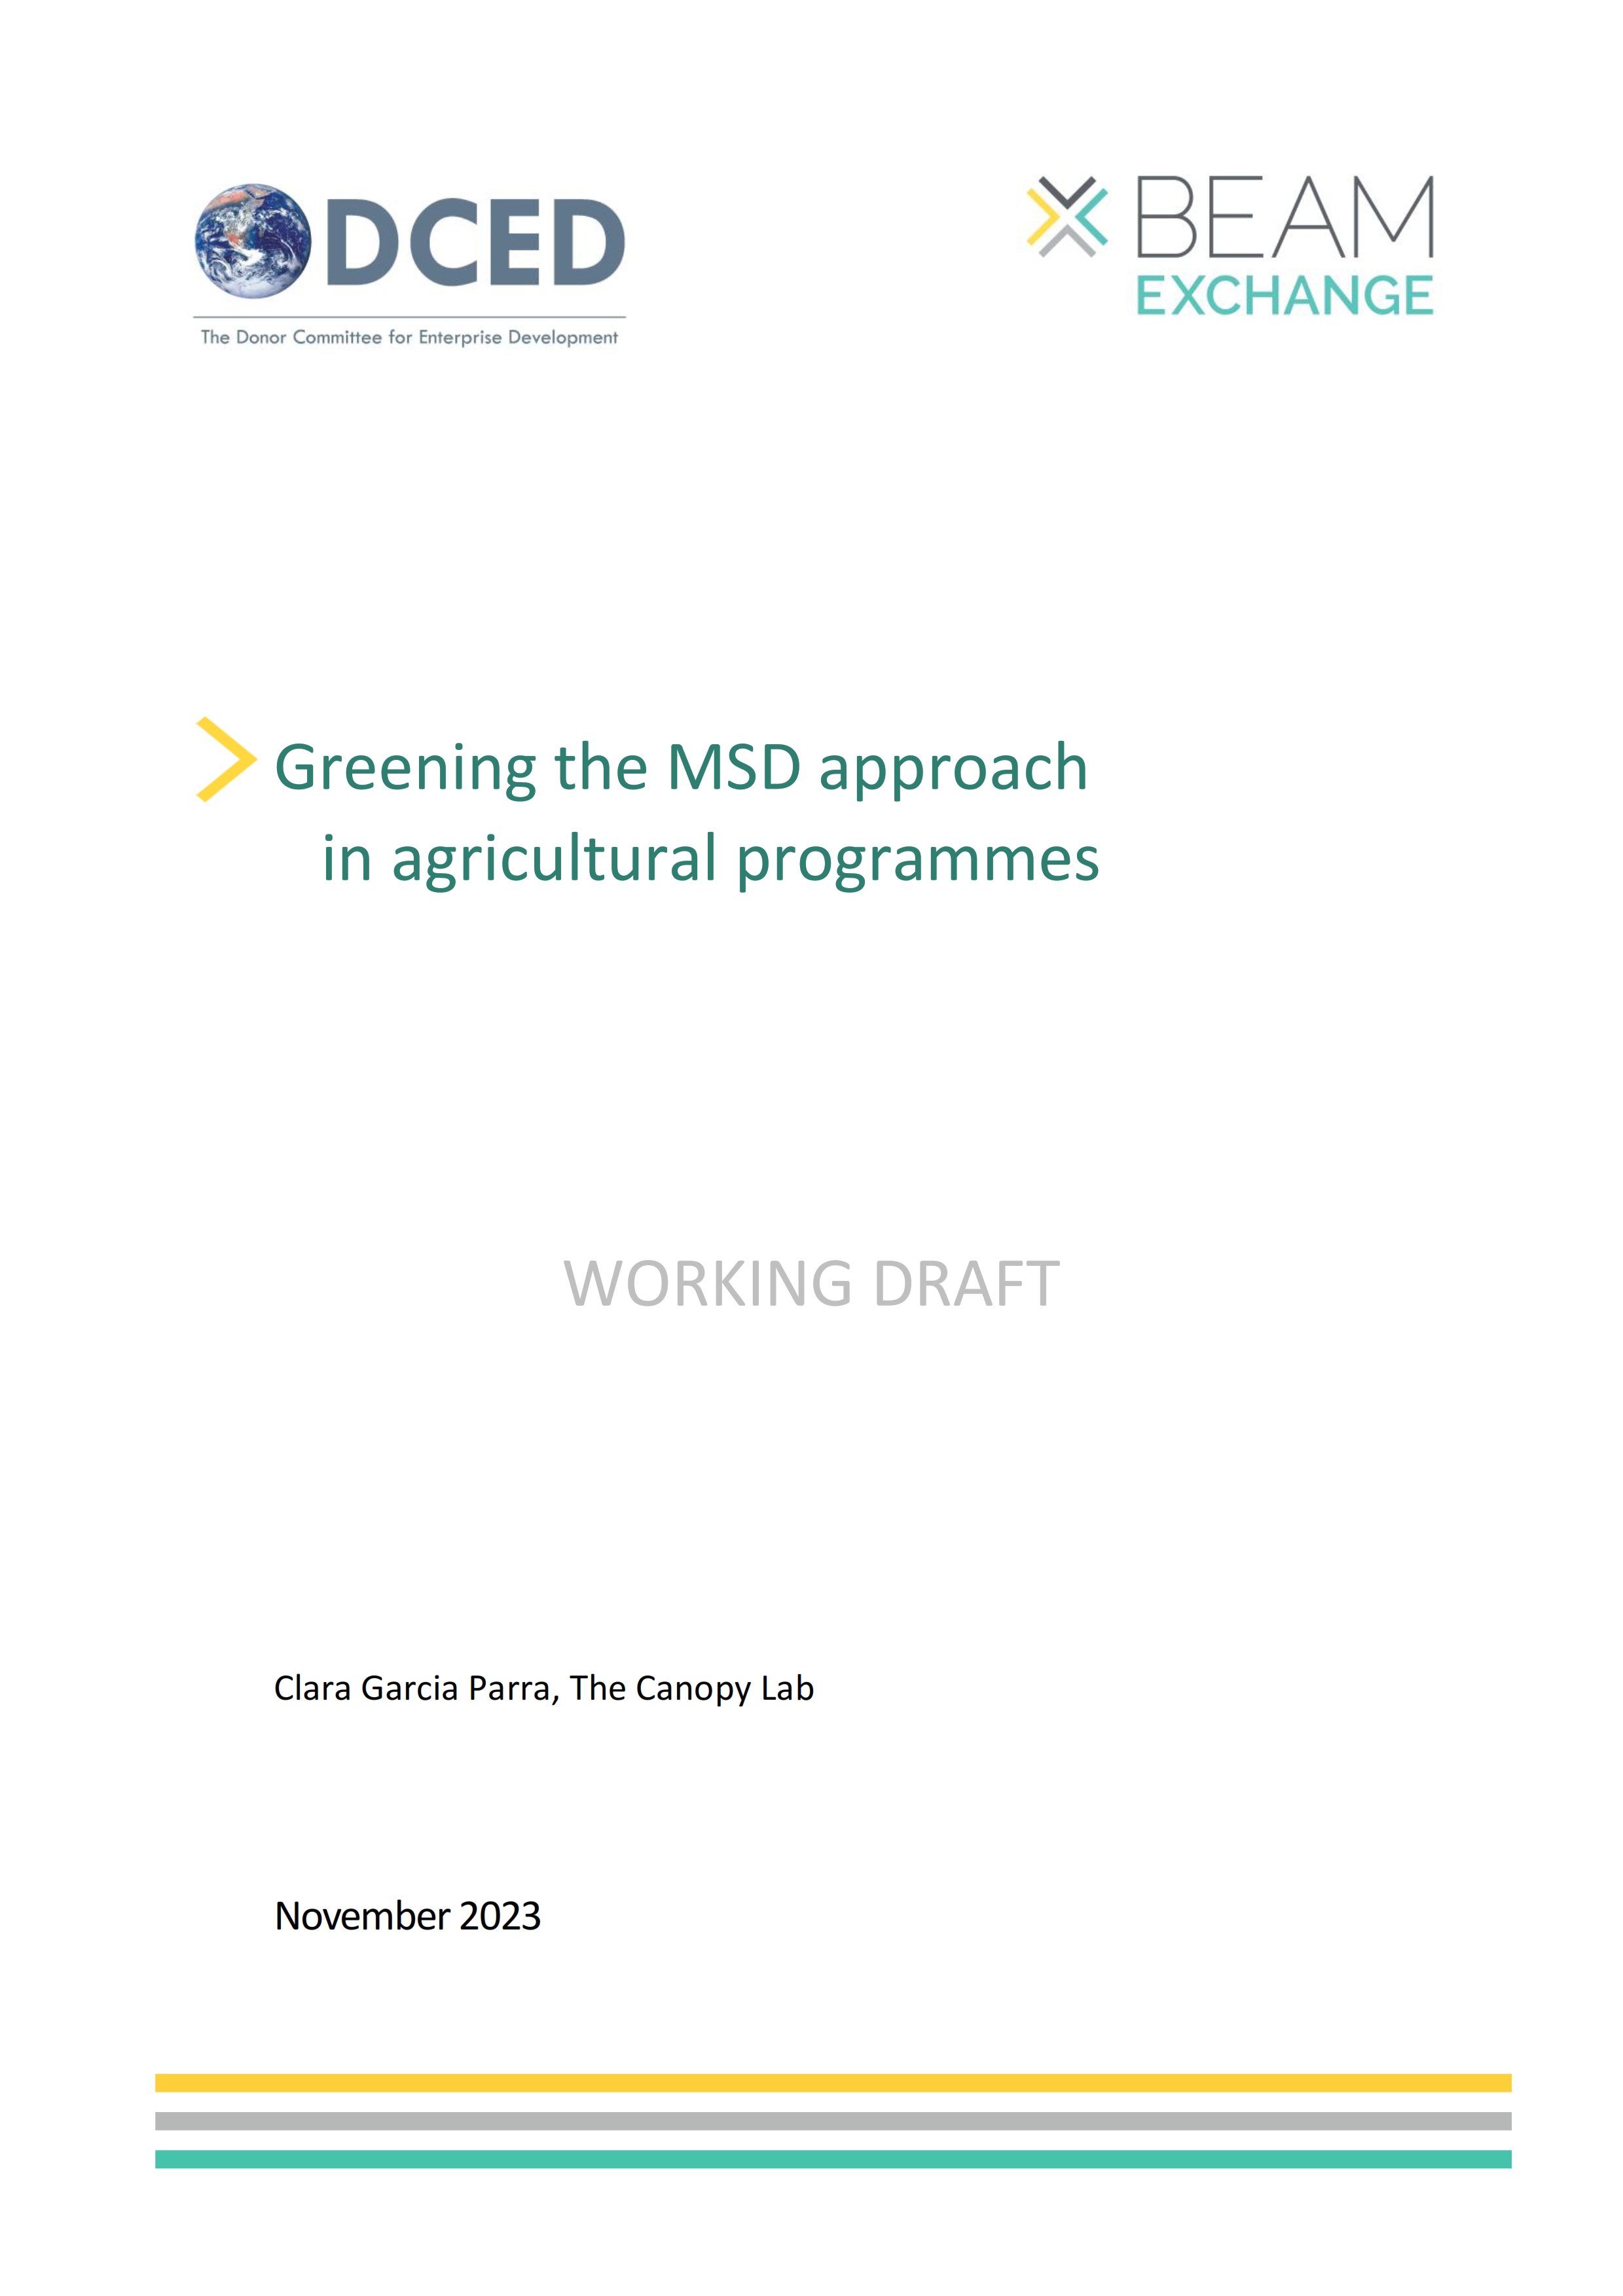 Greening the MSD approach in agricultural programmes